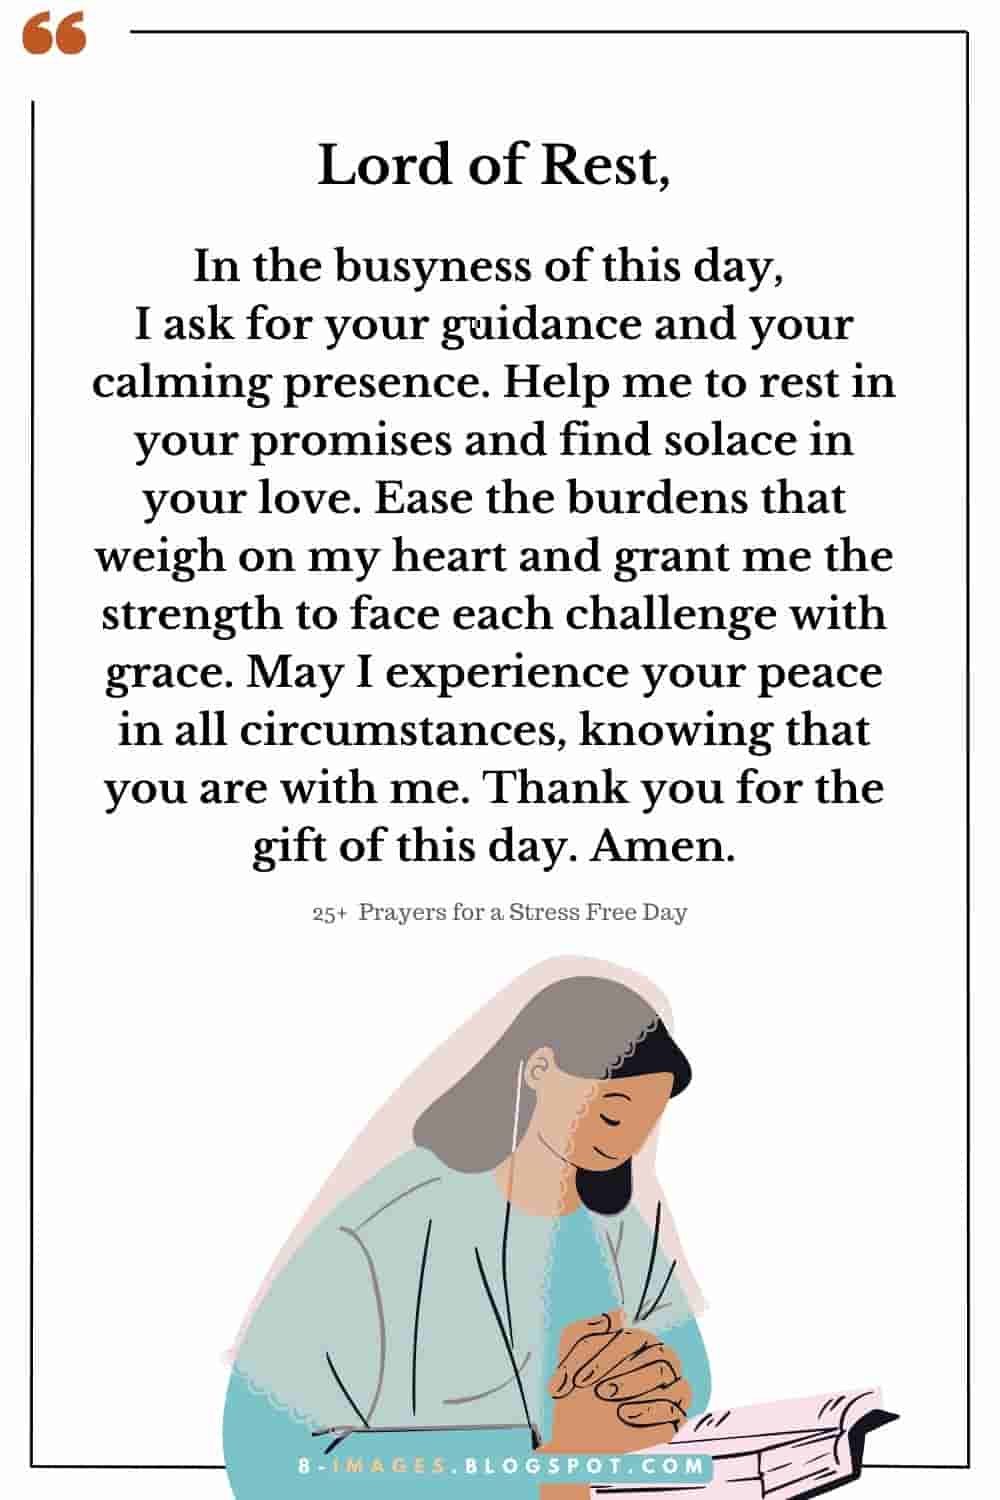 prayer for a Stress Free Day